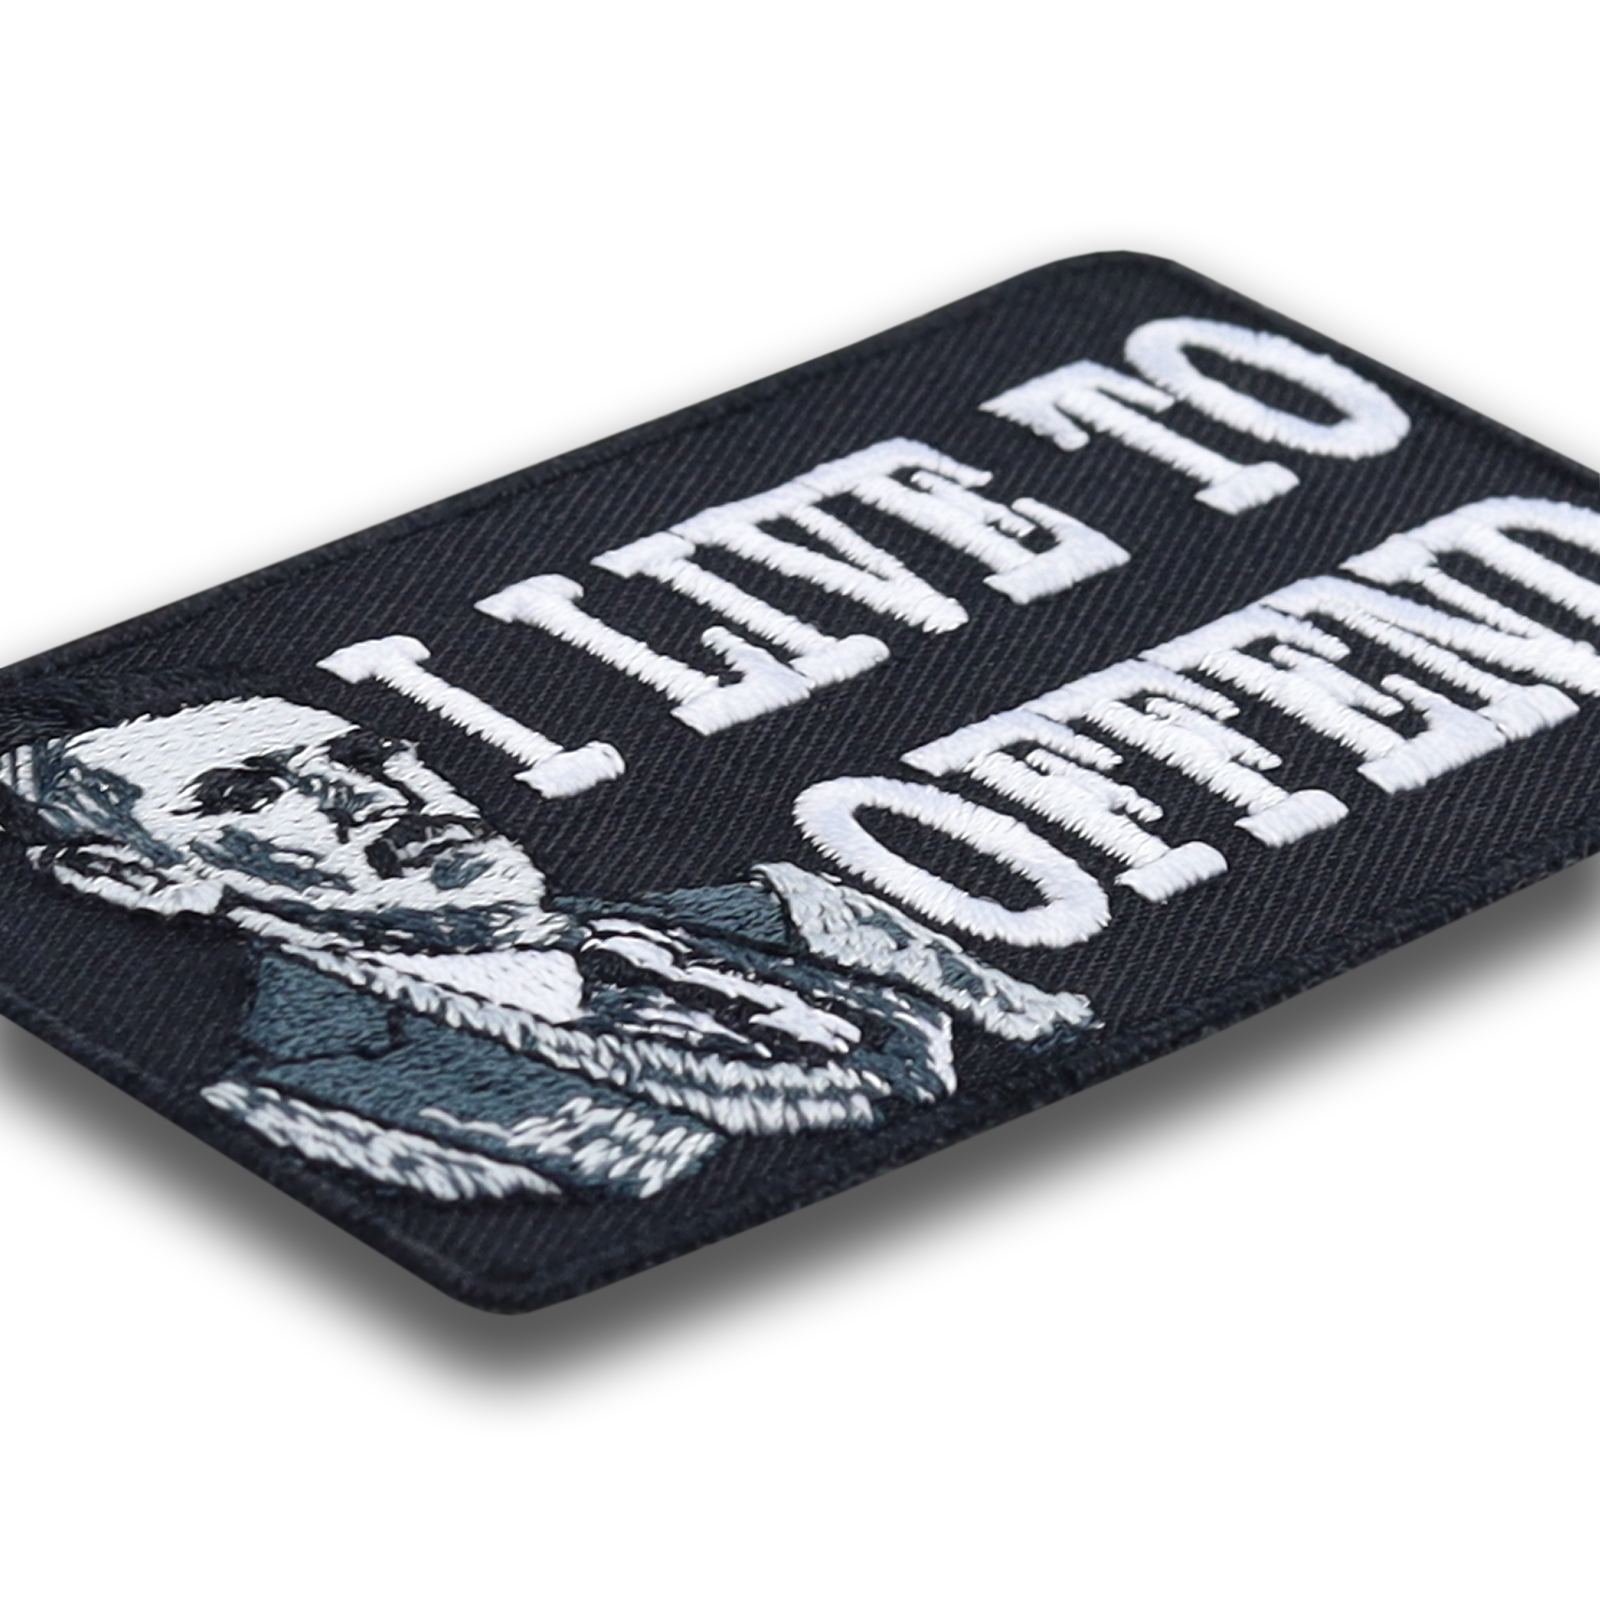 I live to offend - Patch